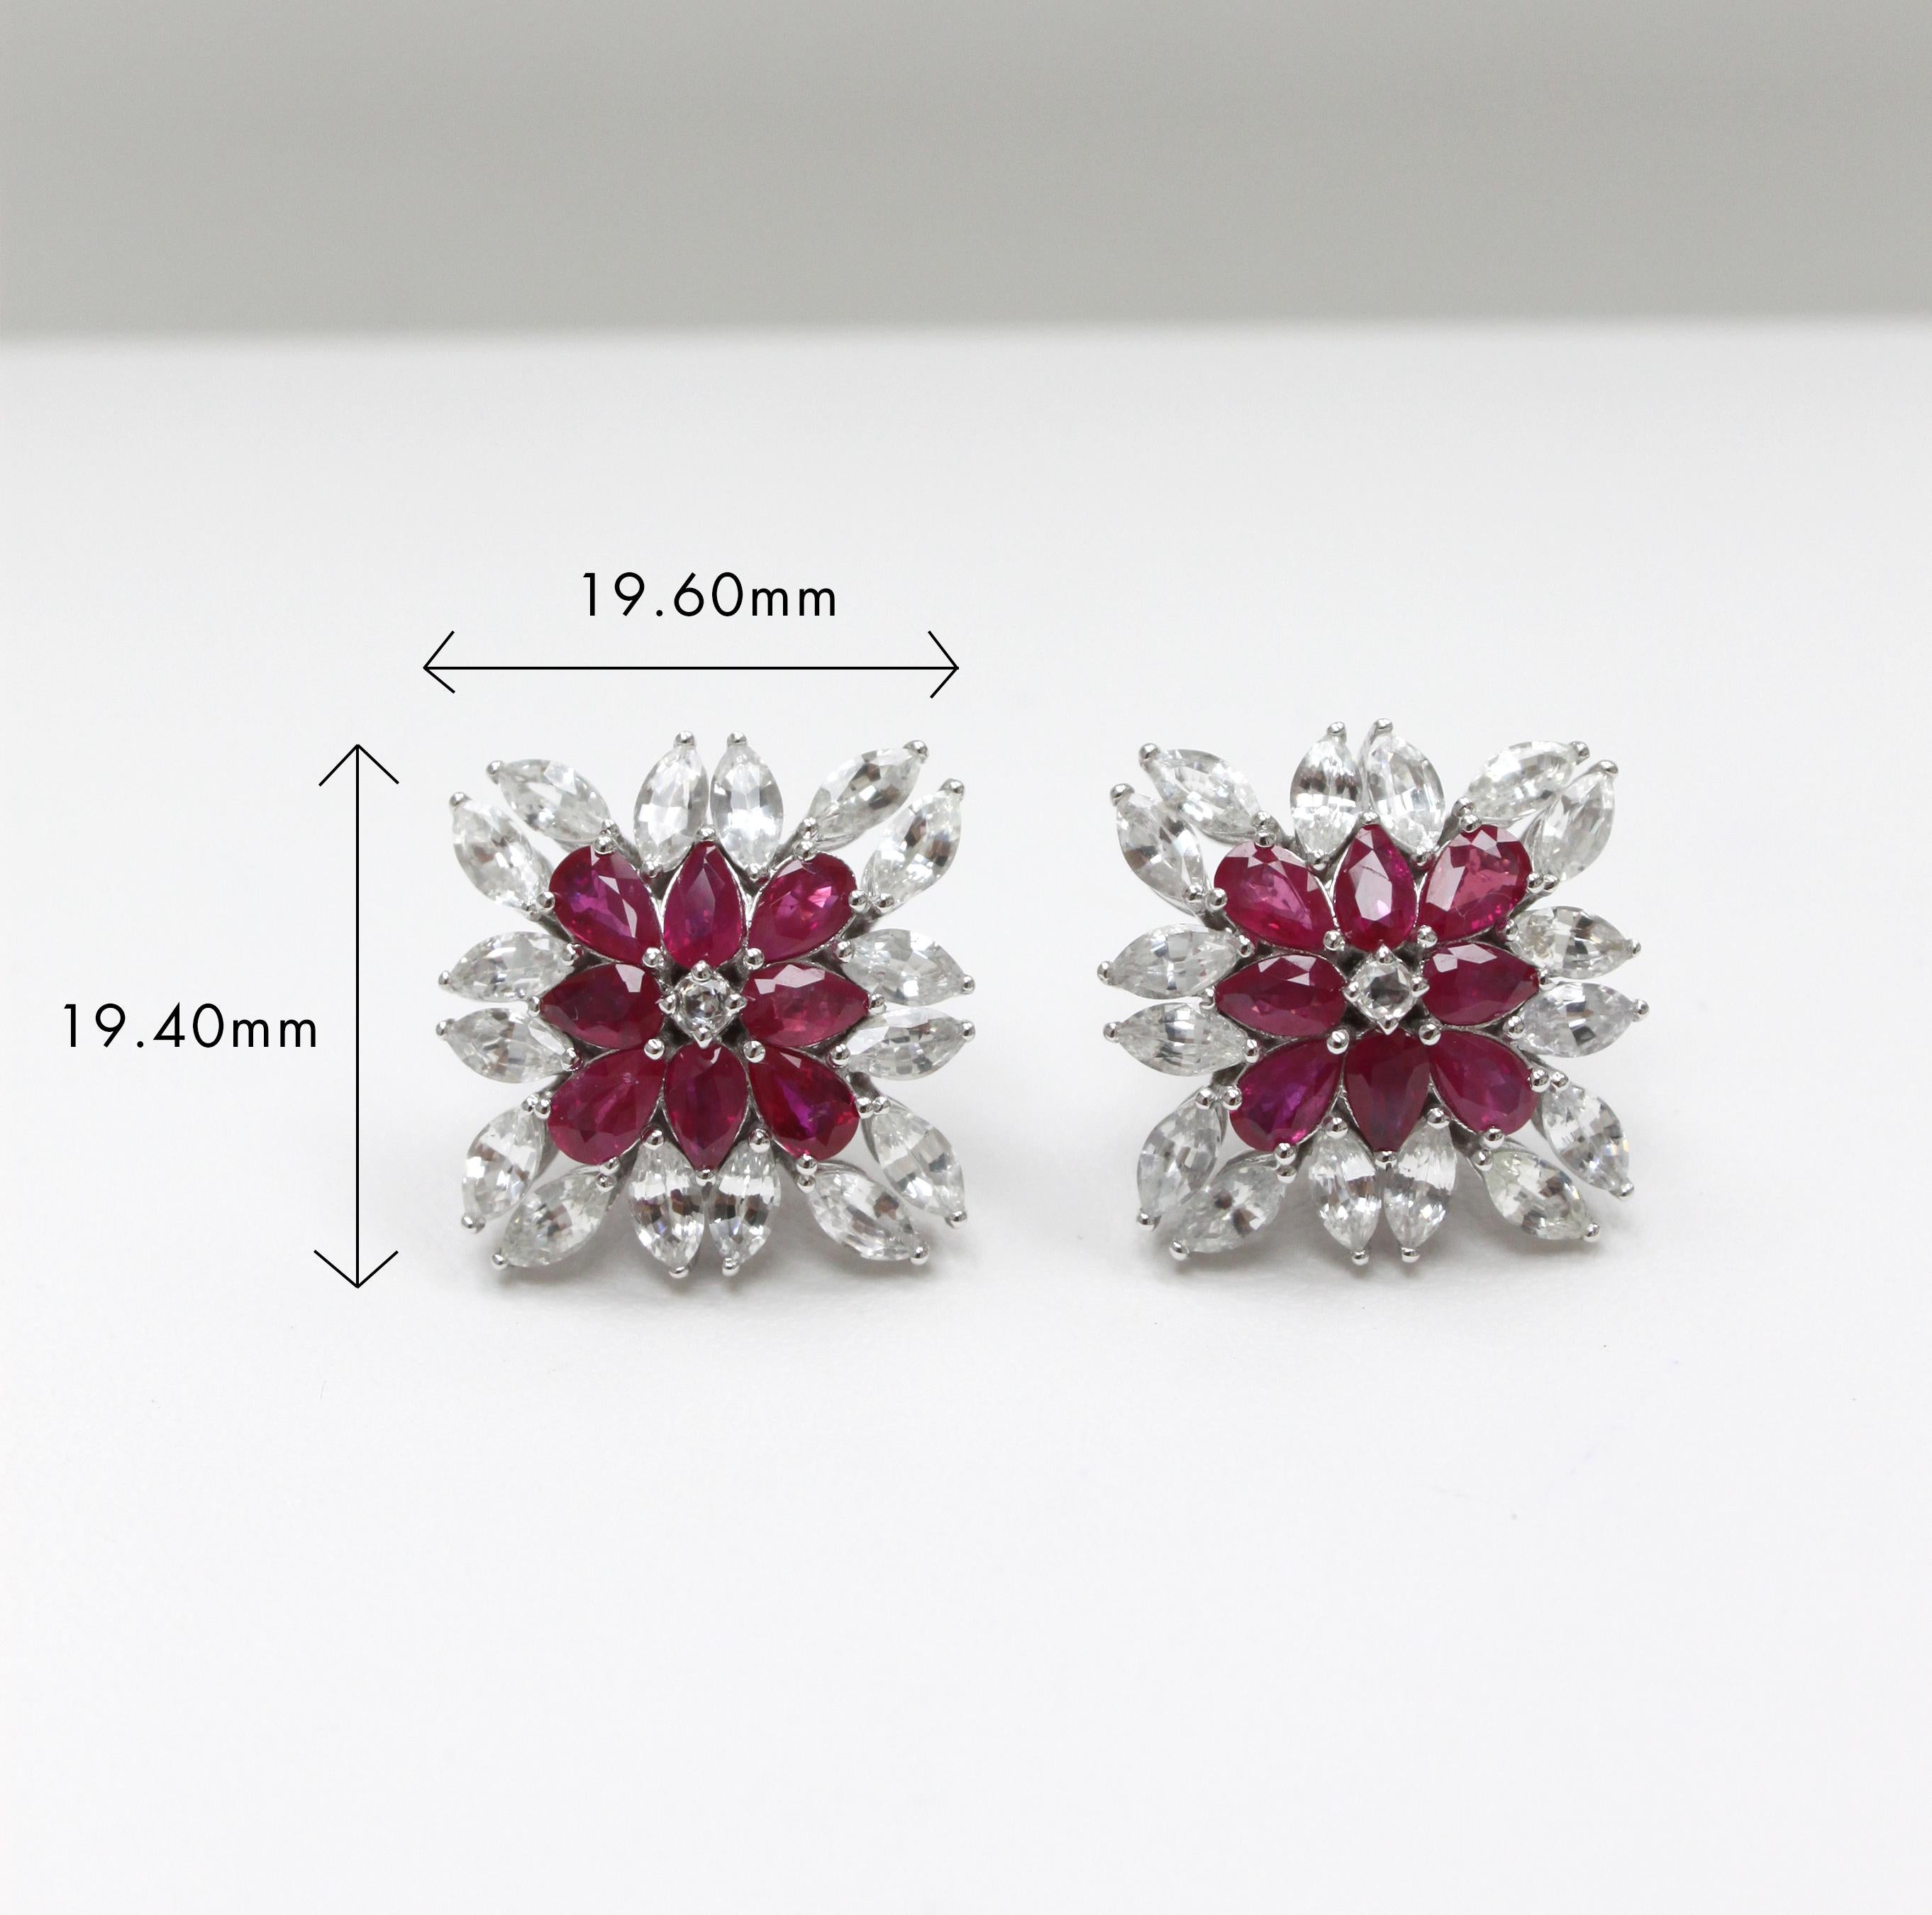 14K white gold
3.45ct ruby 
5.95ct white sapphire 
Total earring weight 10.41g

Mesmerizing geometry meets captivating color in these stunning 14K white gold earrings. At the center, a sparkling round white sapphire adds a touch of subtle